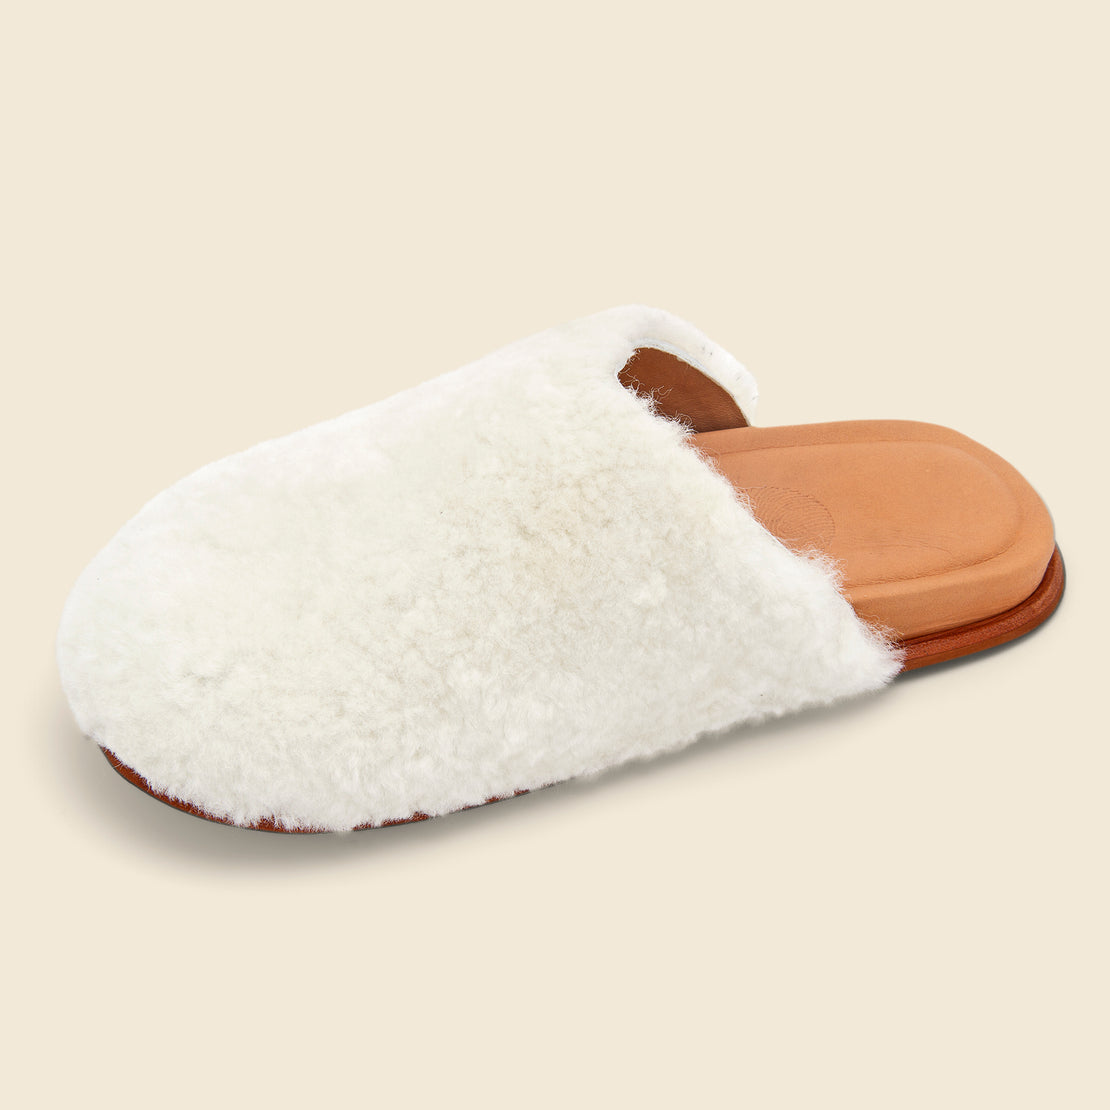 Ogden Slide - Shearling - Wal & Pai - STAG Provisions - W - Shoes - Sandals